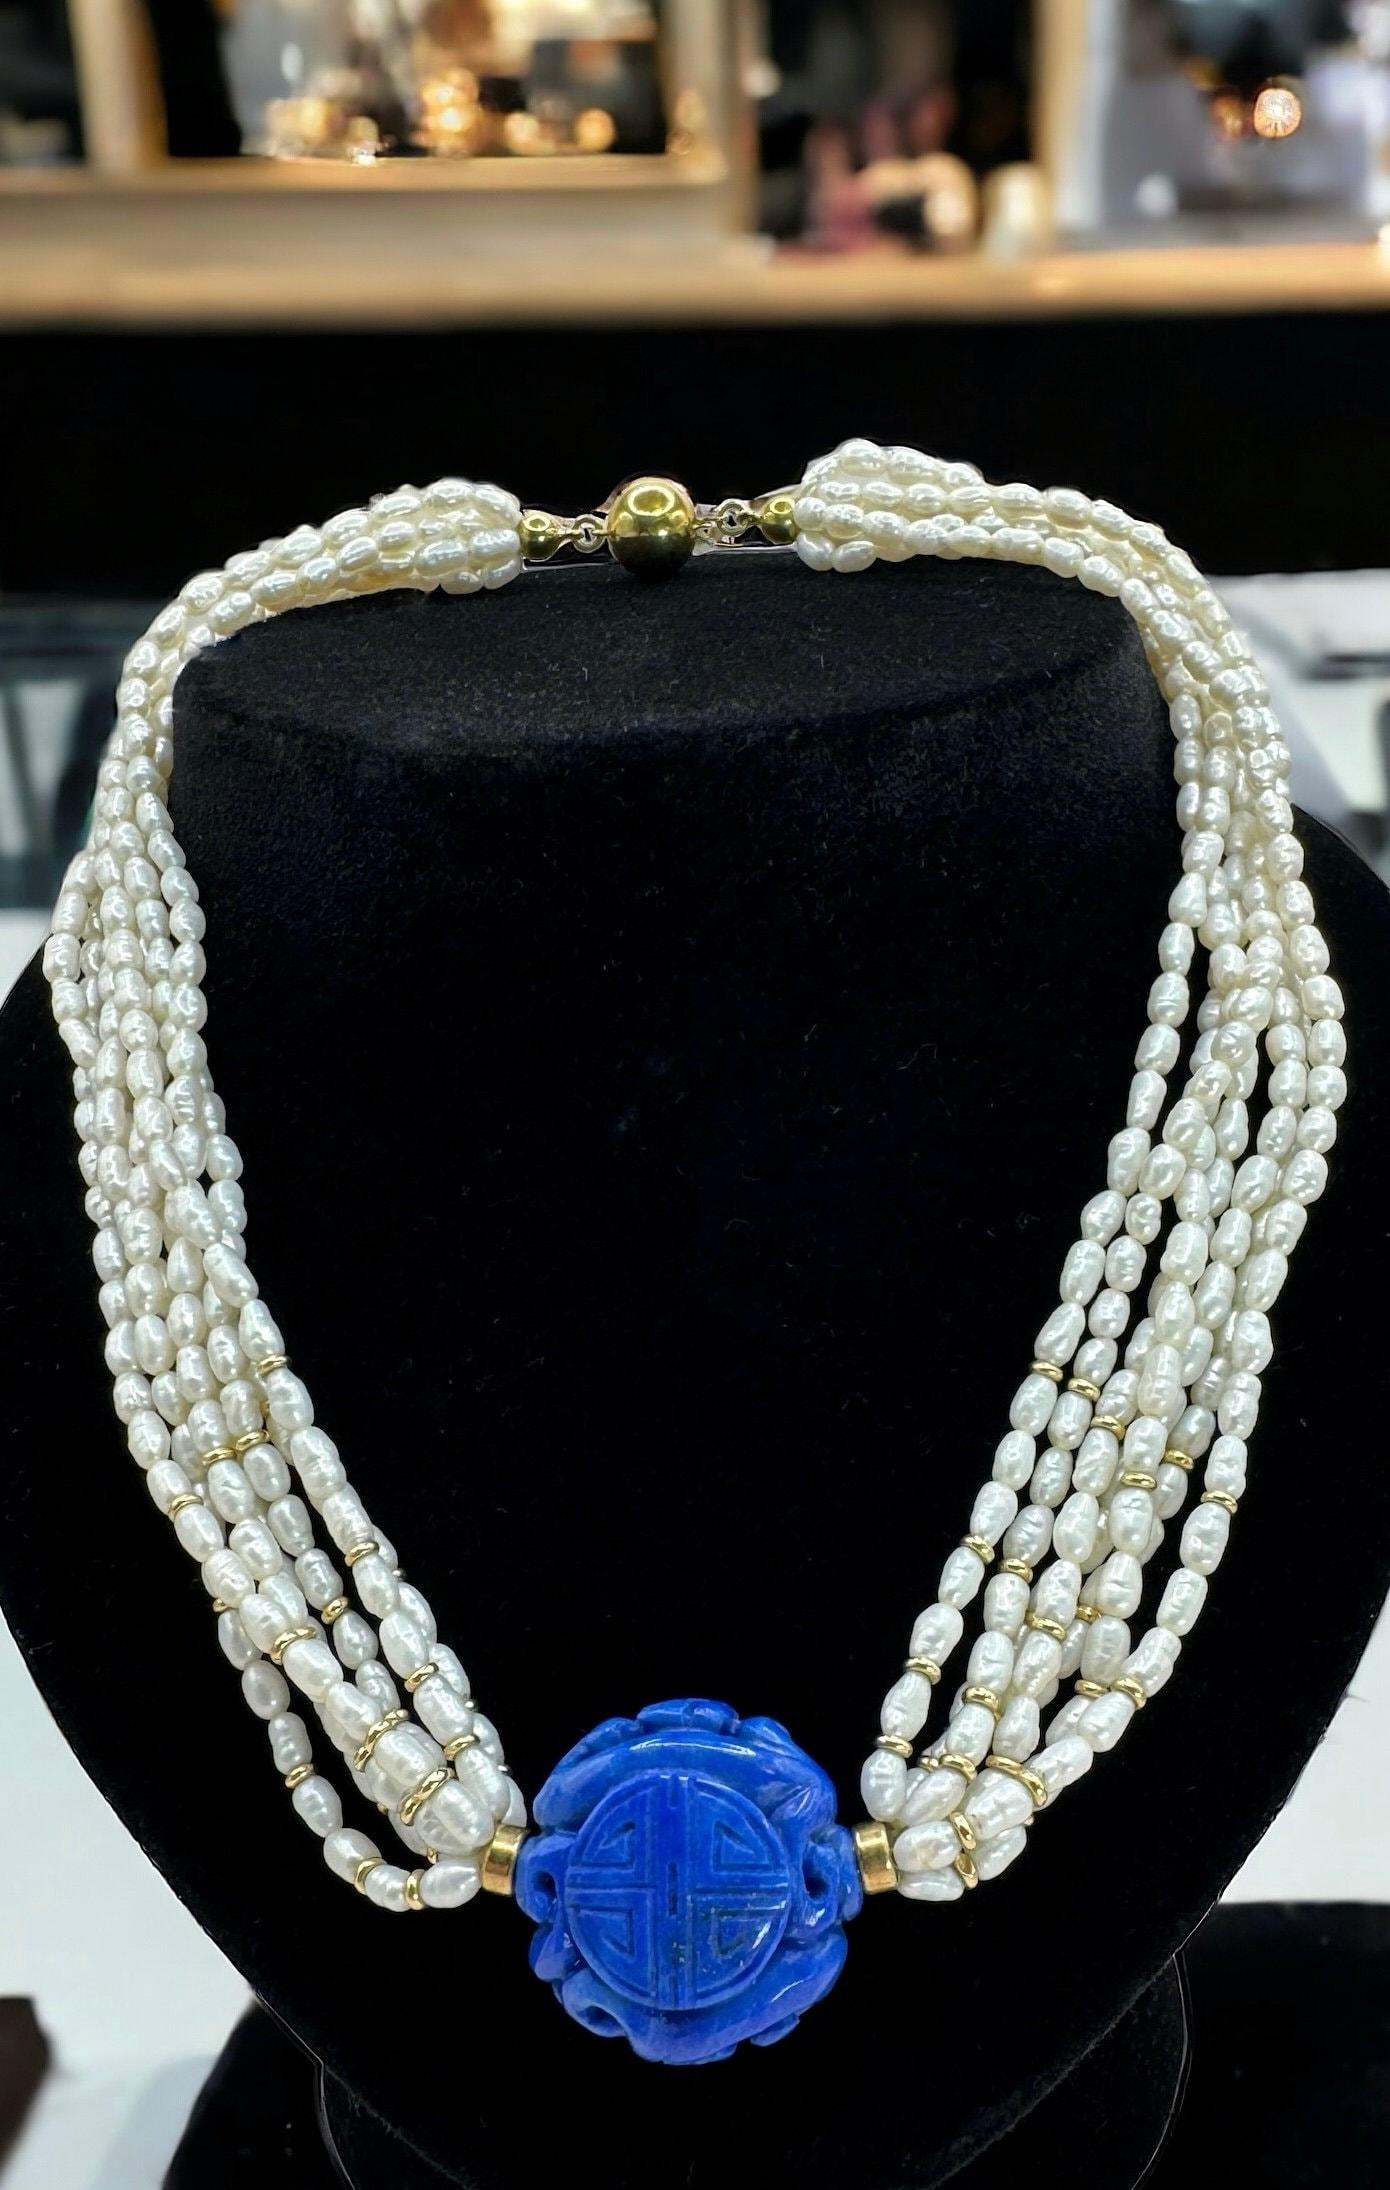 Unveil the splendor of yesteryears with this vintage necklace, strung with delicate freshwater rice pearls. 

This piece weighs 53.2 grams and spans 40 cm, culminating in a majestic, carved lapis lazuli centerpiece. 

The necklace is interspersed